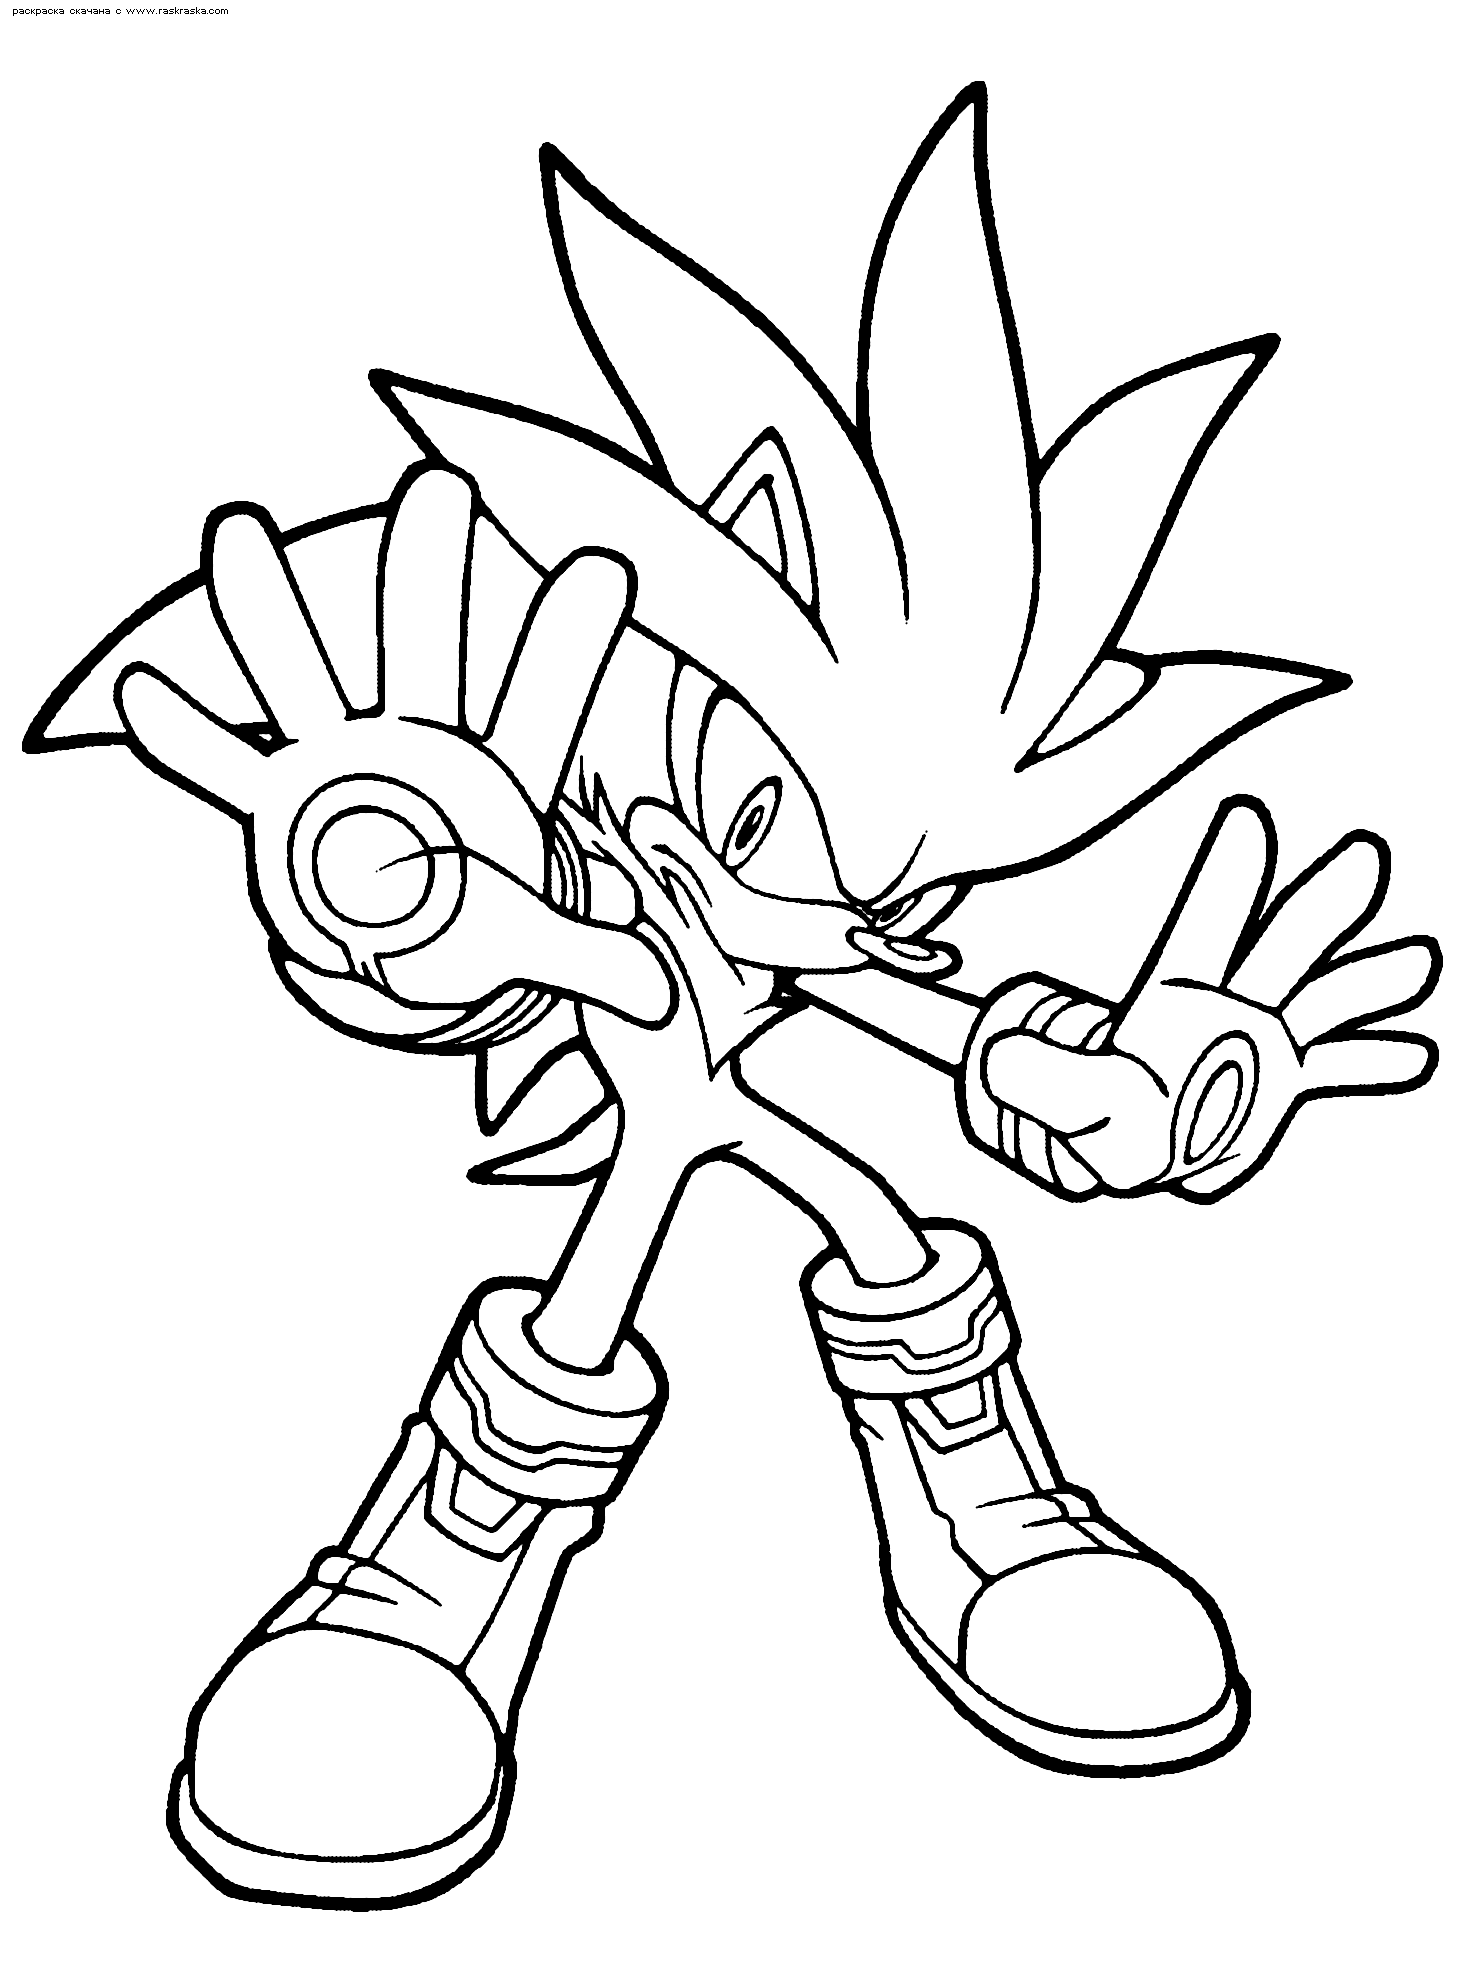 Super Sonic And Super Shadow - Coloring Pages for Kids and for Adults